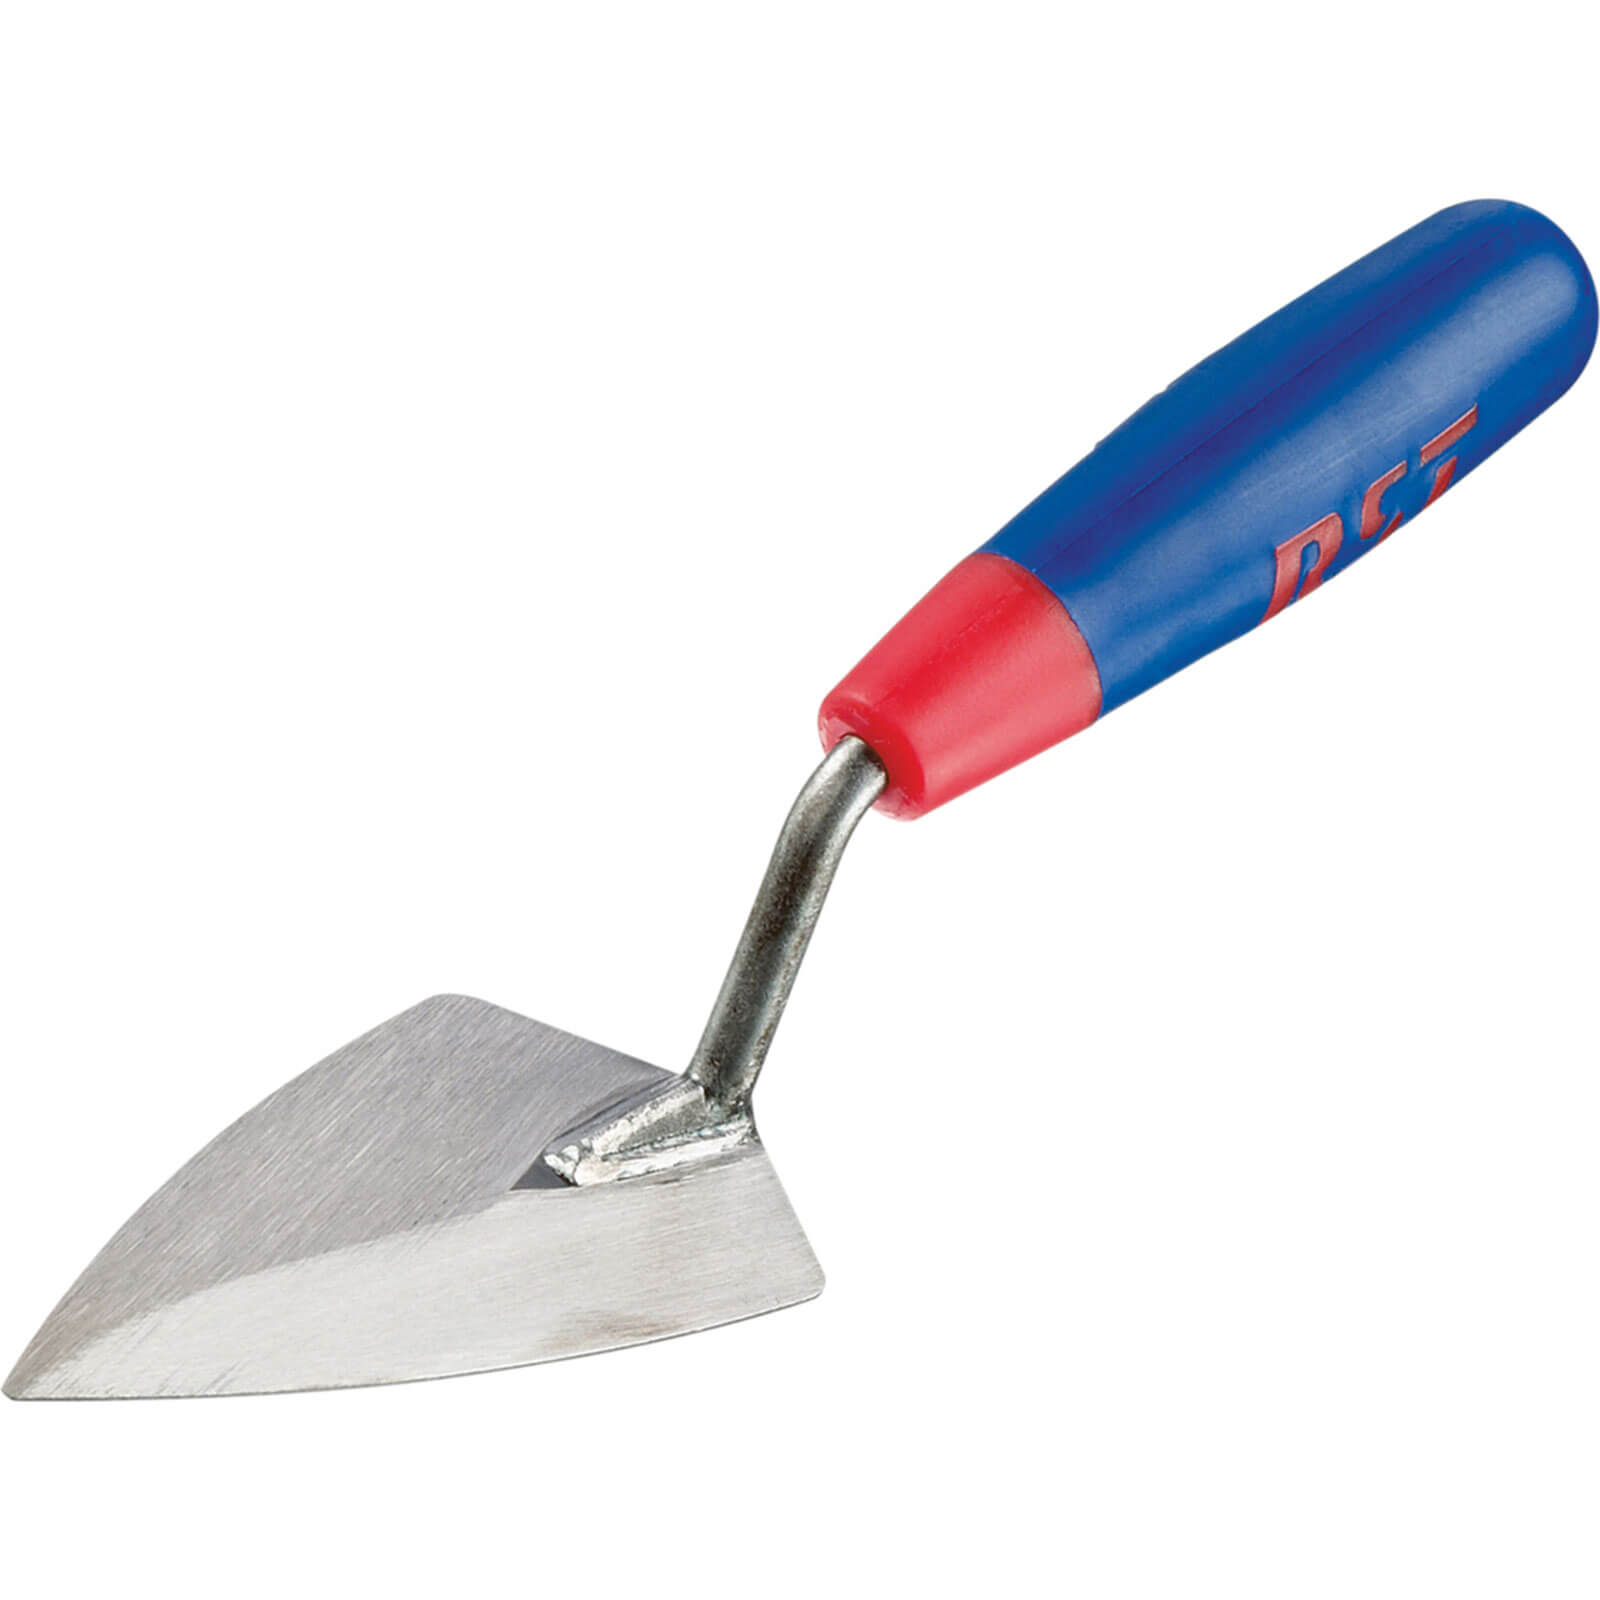 Image of RST Soft Touch Philadelphia Pattern Pointing Trowel 5"